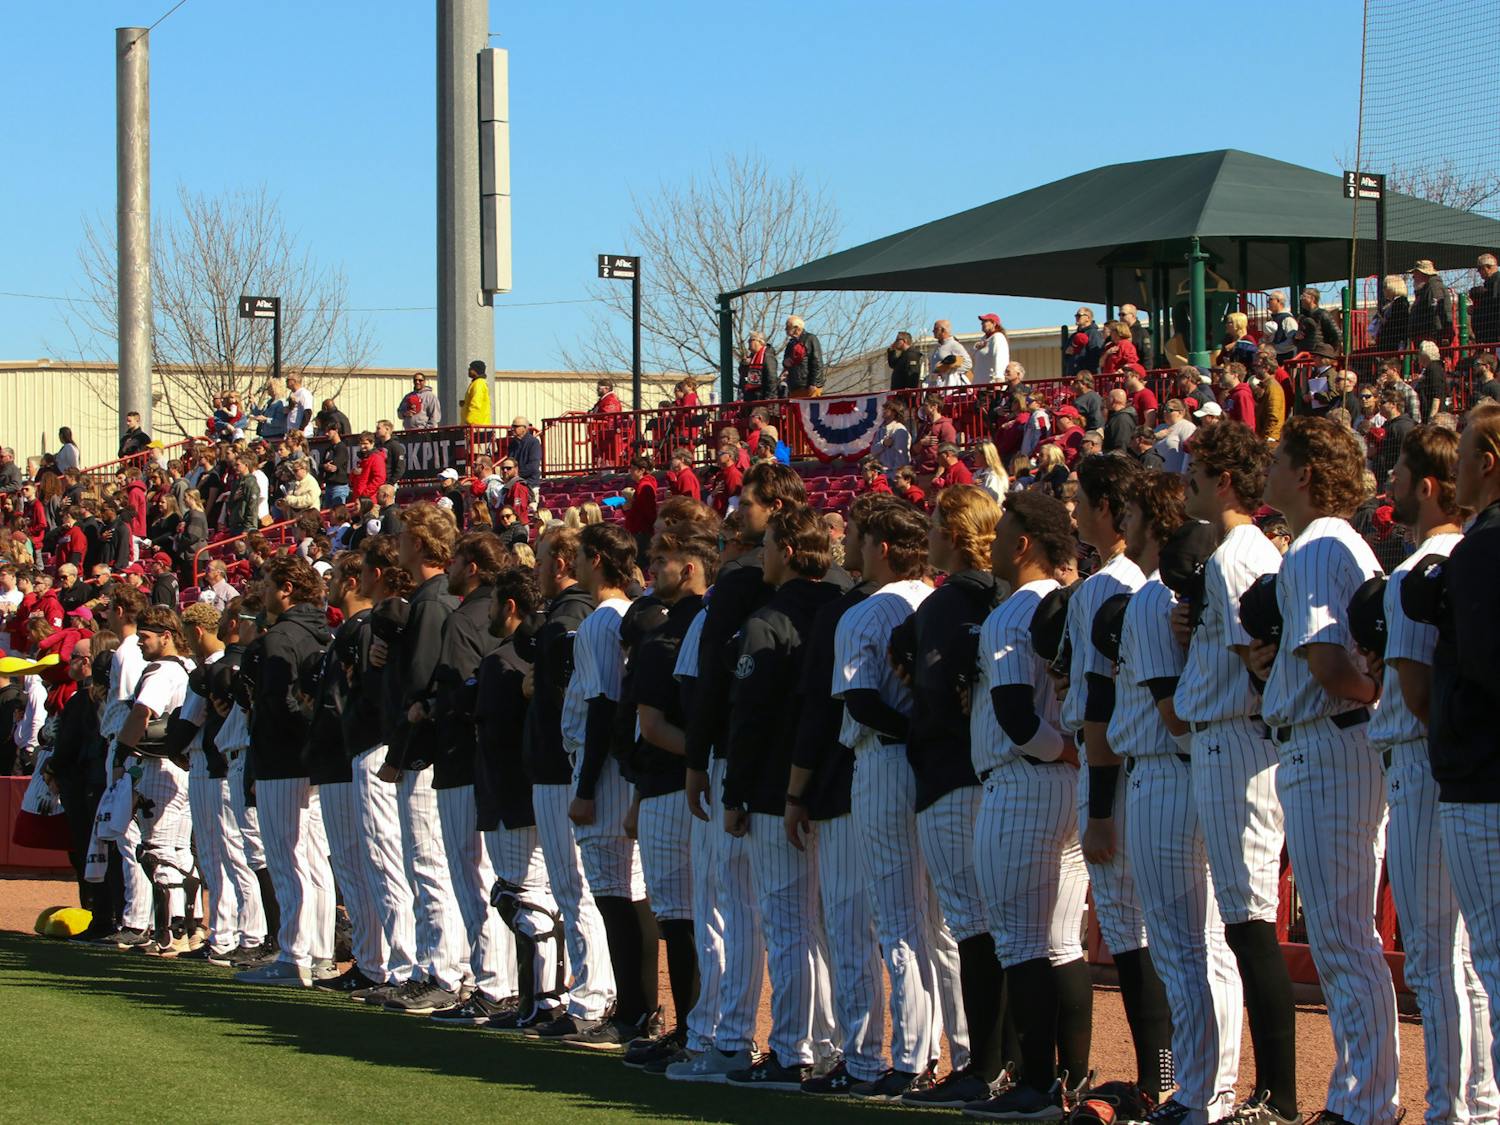 South Carolina baseball lines up for the national anthem prior to the start of their game against UMass Lowell at Founders Park on Feb. 18, 2023. The Gamecocks won 17-1 in the second game of a three-game series. &nbsp;